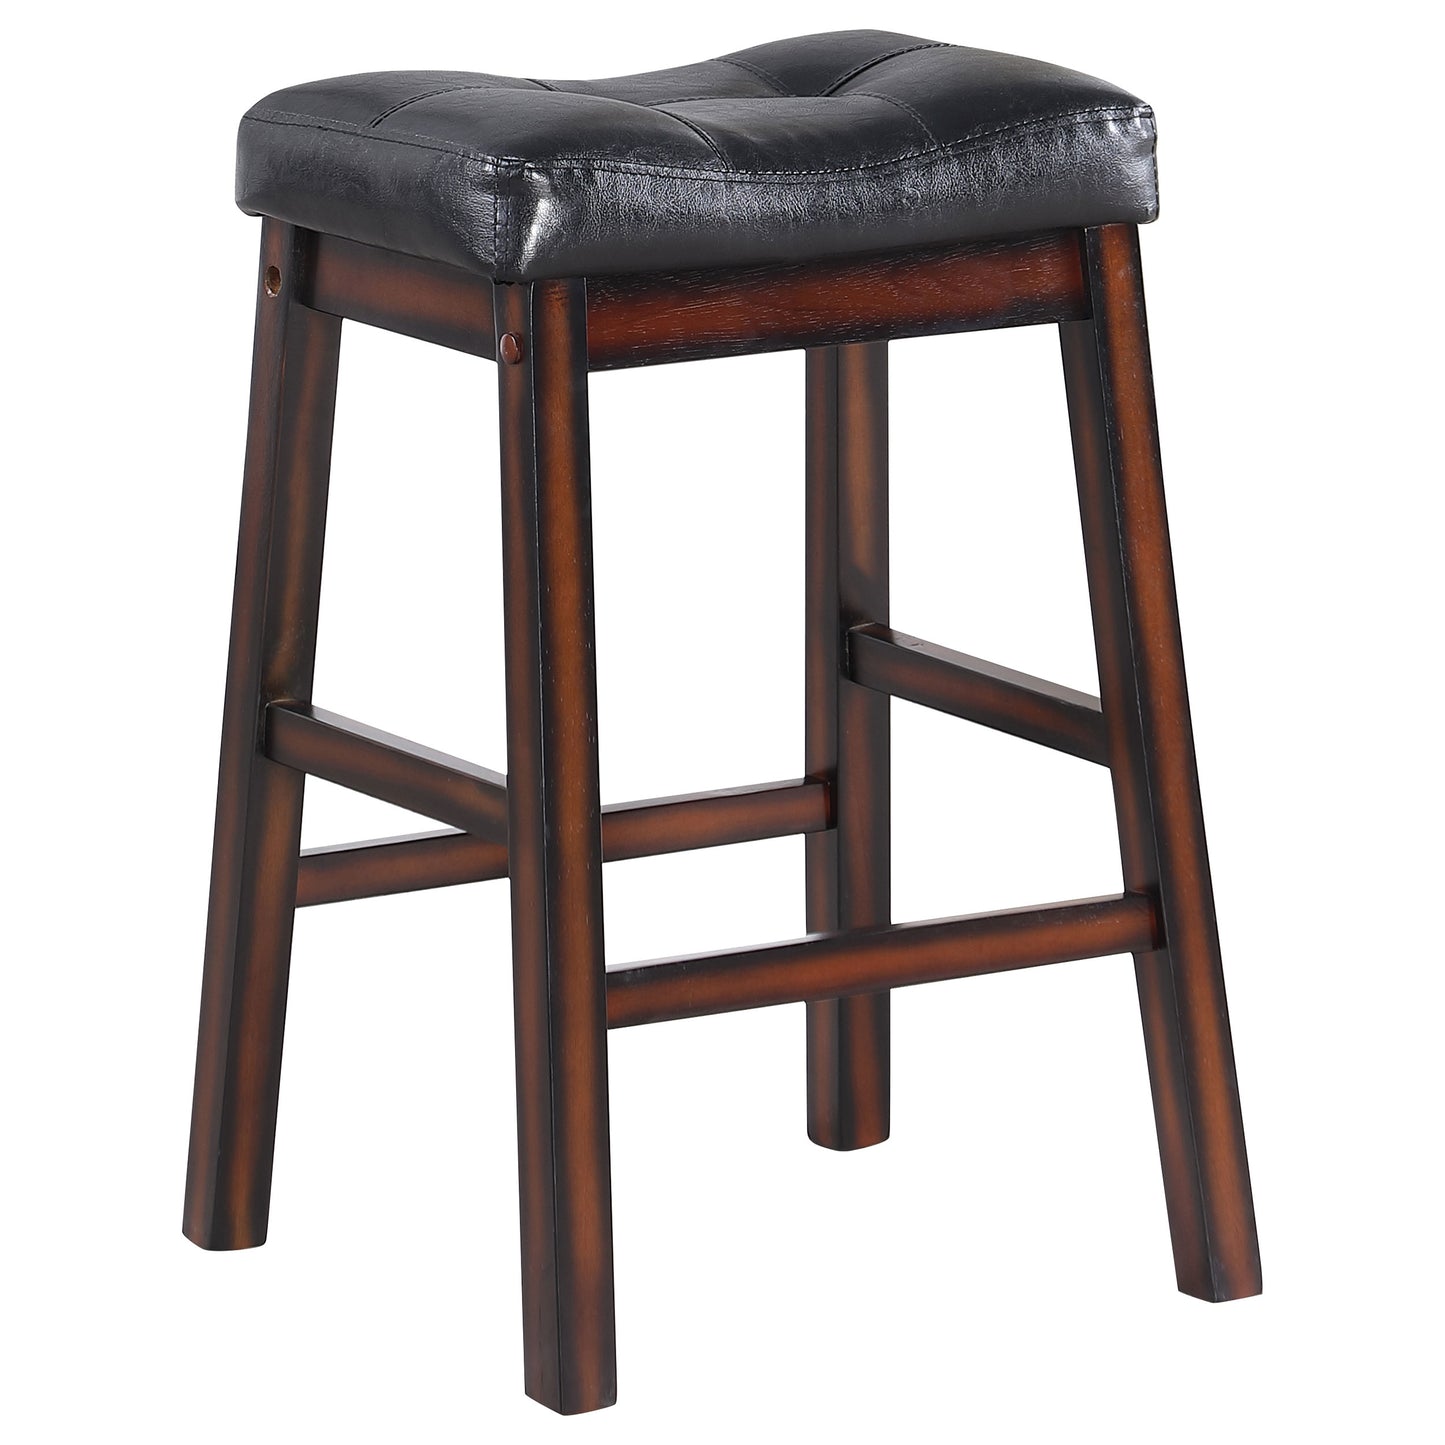 Donald Upholstered Counter Height Stools Black and Cappuccino (Set of 2)